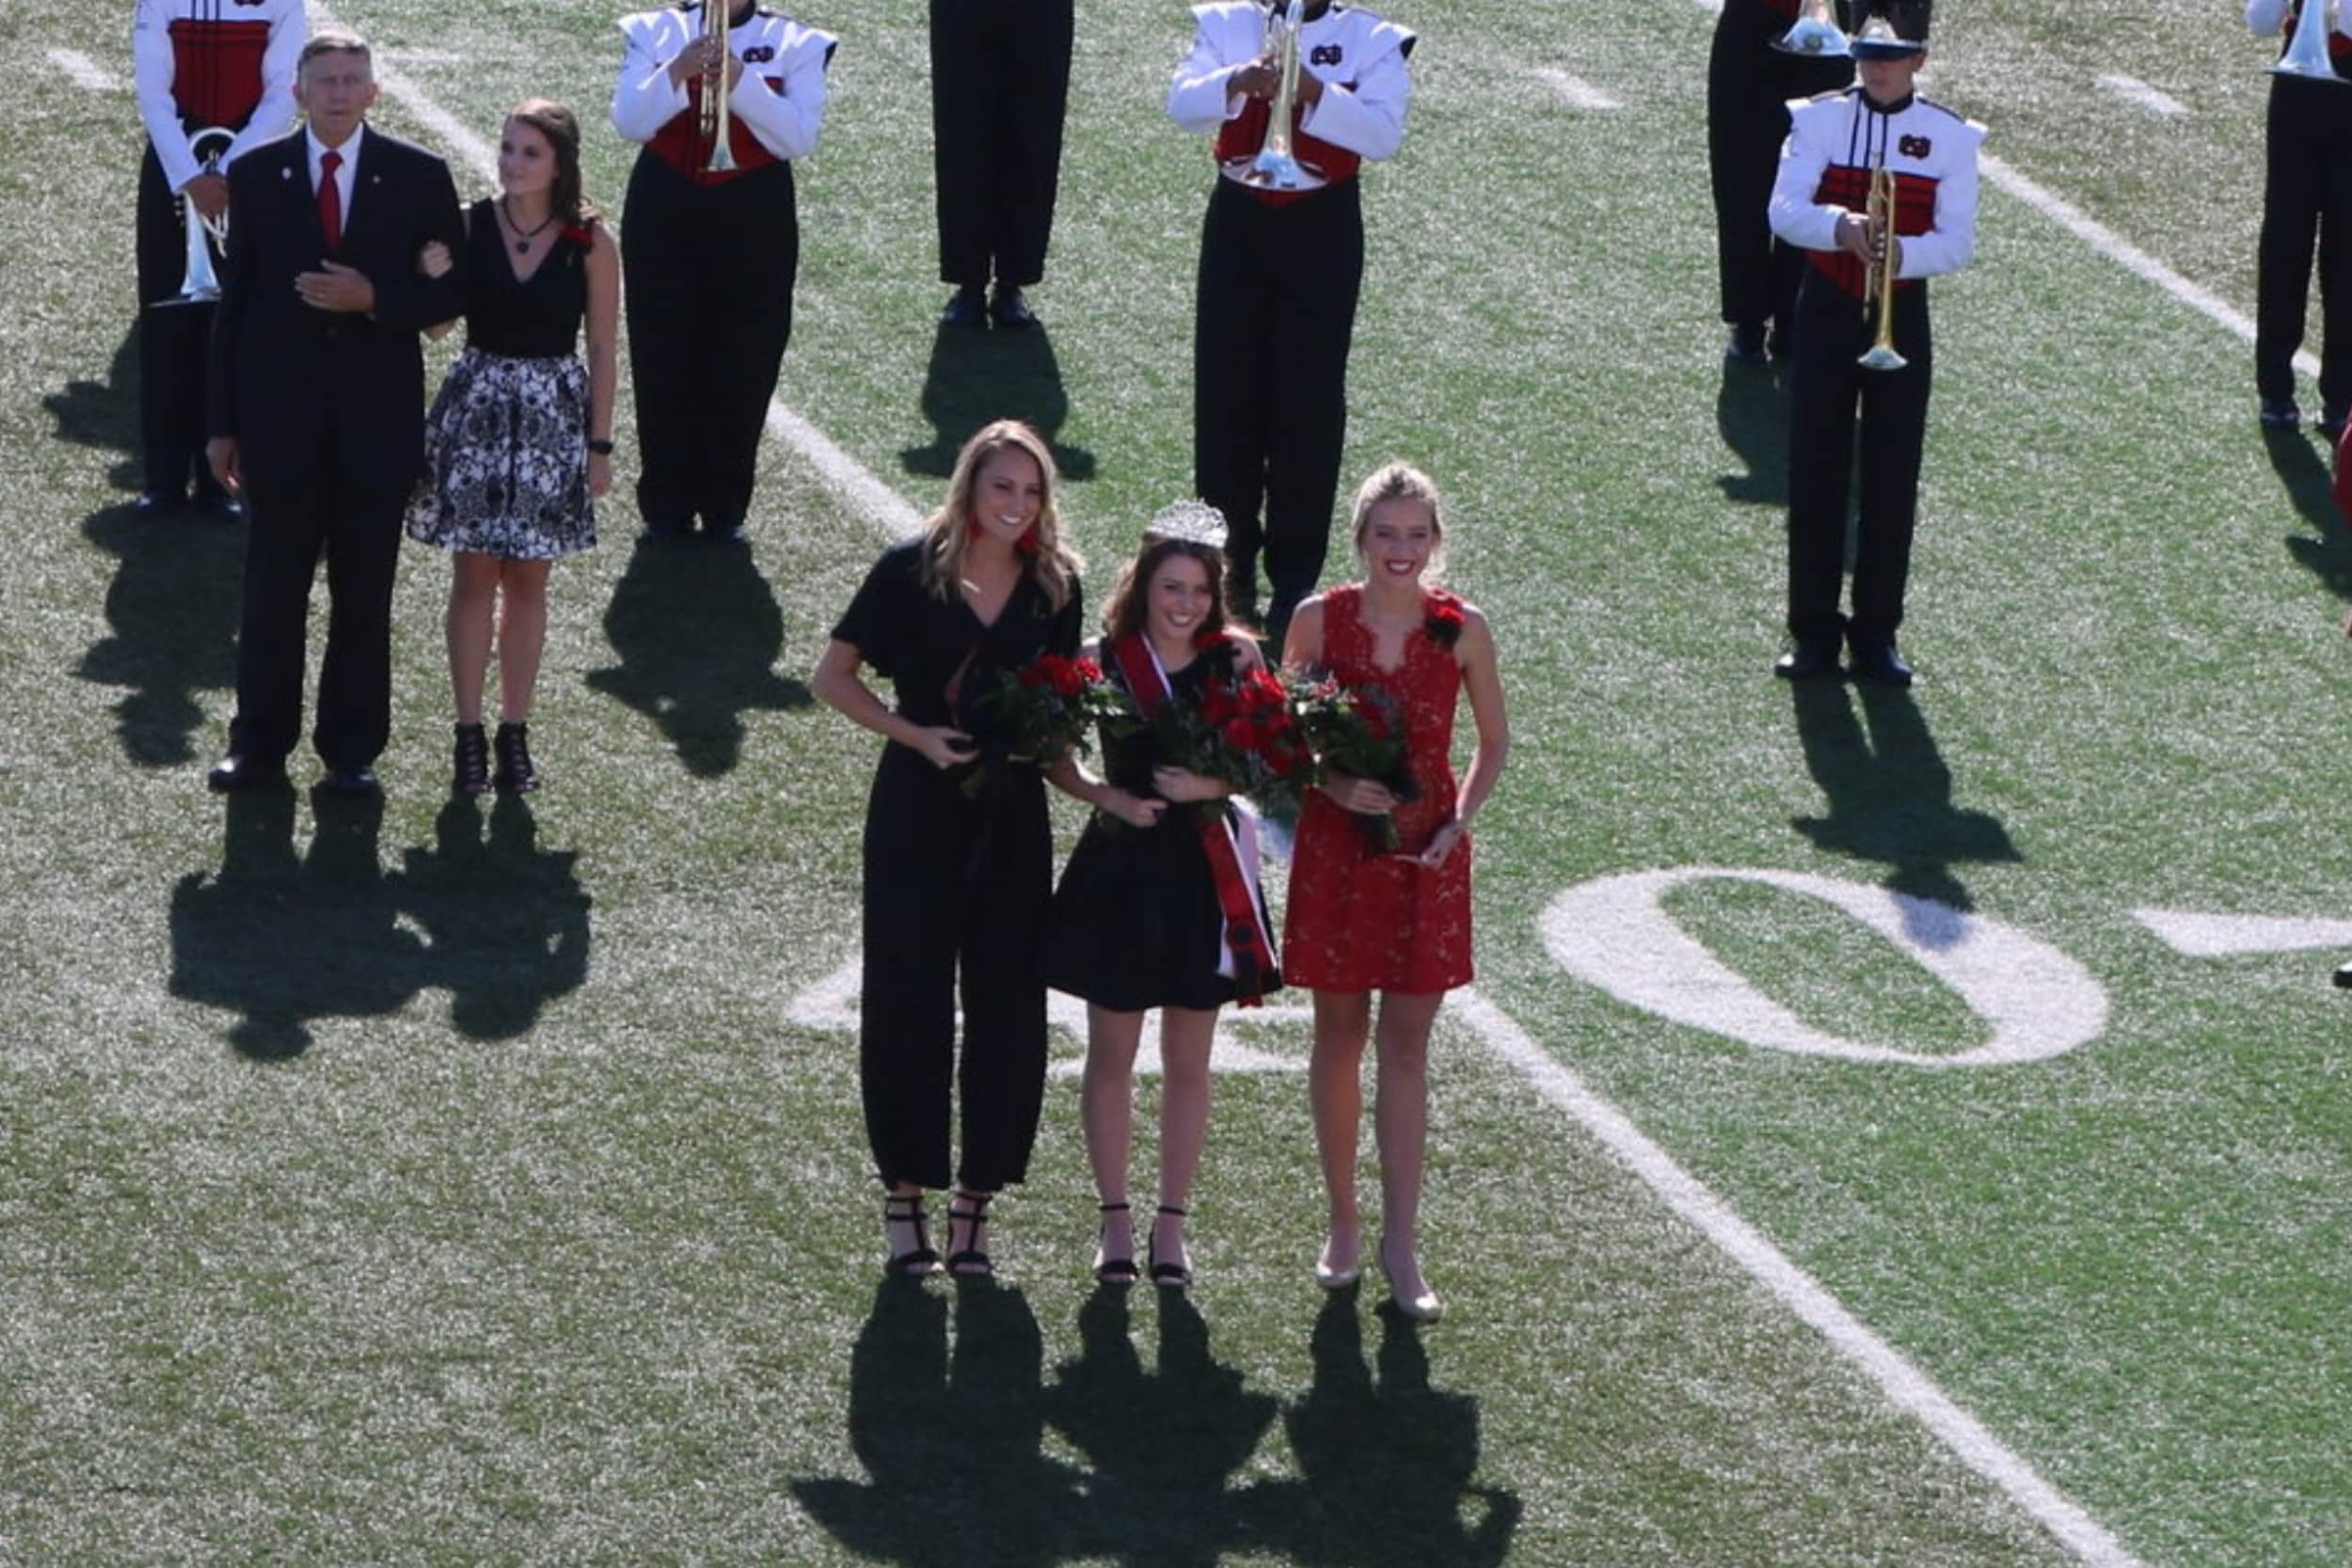 Junior, Allison Yeater, was announced NGUs Homecoming Queen 2018, and standing with her are 1st Runner Up junior, Courtney Williamson and 2nd Runner Up junior, Gabriella Porter.